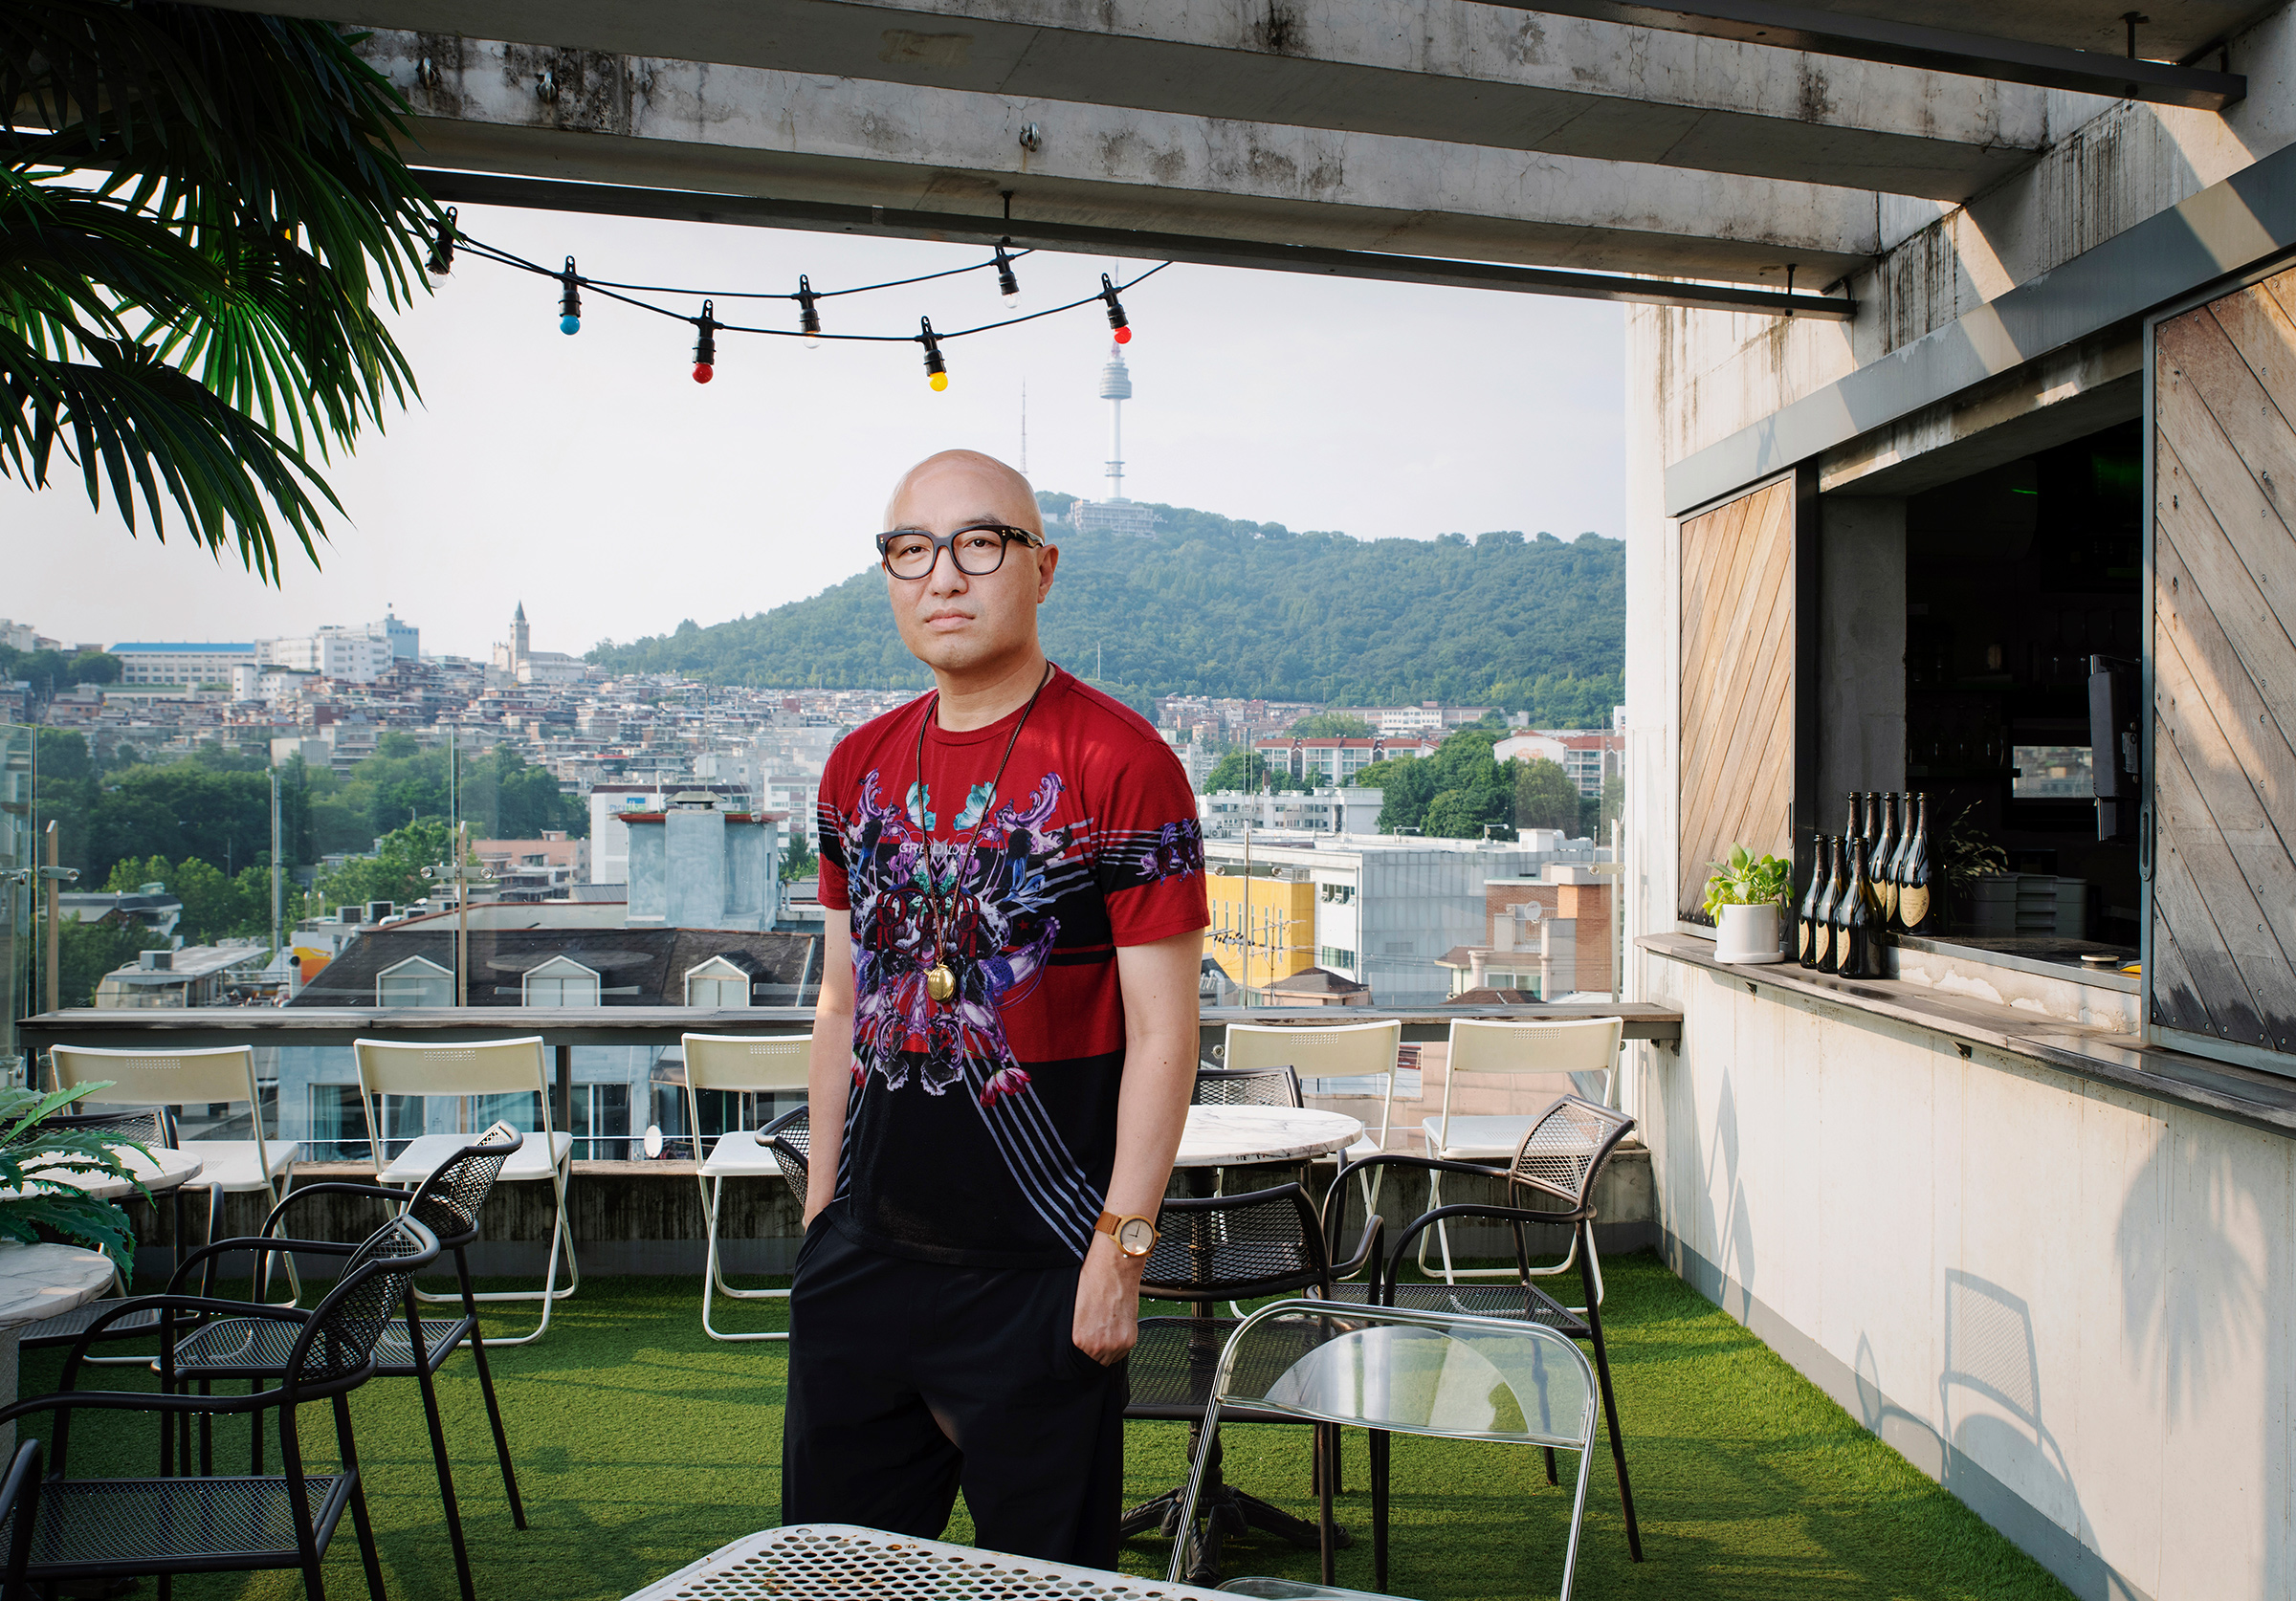 <b>Hong Seok-cheon</b> poses for a portrait in where used to be his rooftop restaurant, My Sky, in Itaewon, Seoul, on June 23. "All around the world, there are neighborhoods here and there that recognize diversity," he says. "I think in Korea, that's Itaewon. And I realized my dream and spent my youth here." After coming out in 2000 and being ousted from television jobs, he opened restaurants in the neighborhood. "I wanted to create spaces where LGBTQ people would coexist with the heterosexual community. So I chose restaurants. Of course, it was difficult at first. The people who came to our restaurant had a very preconceived notion because I was the owner. But as time passed, people recognized my sincerity and hard work and really enjoyed those spaces. It's very sad that they are gone." He says that he feels constant pressure to become a successful LGBTQ role model for Koreans, a burden he has been singularly carrying as the most prominent celebrity who has come out. (Sangsuk Sylvia Kang for TIME)